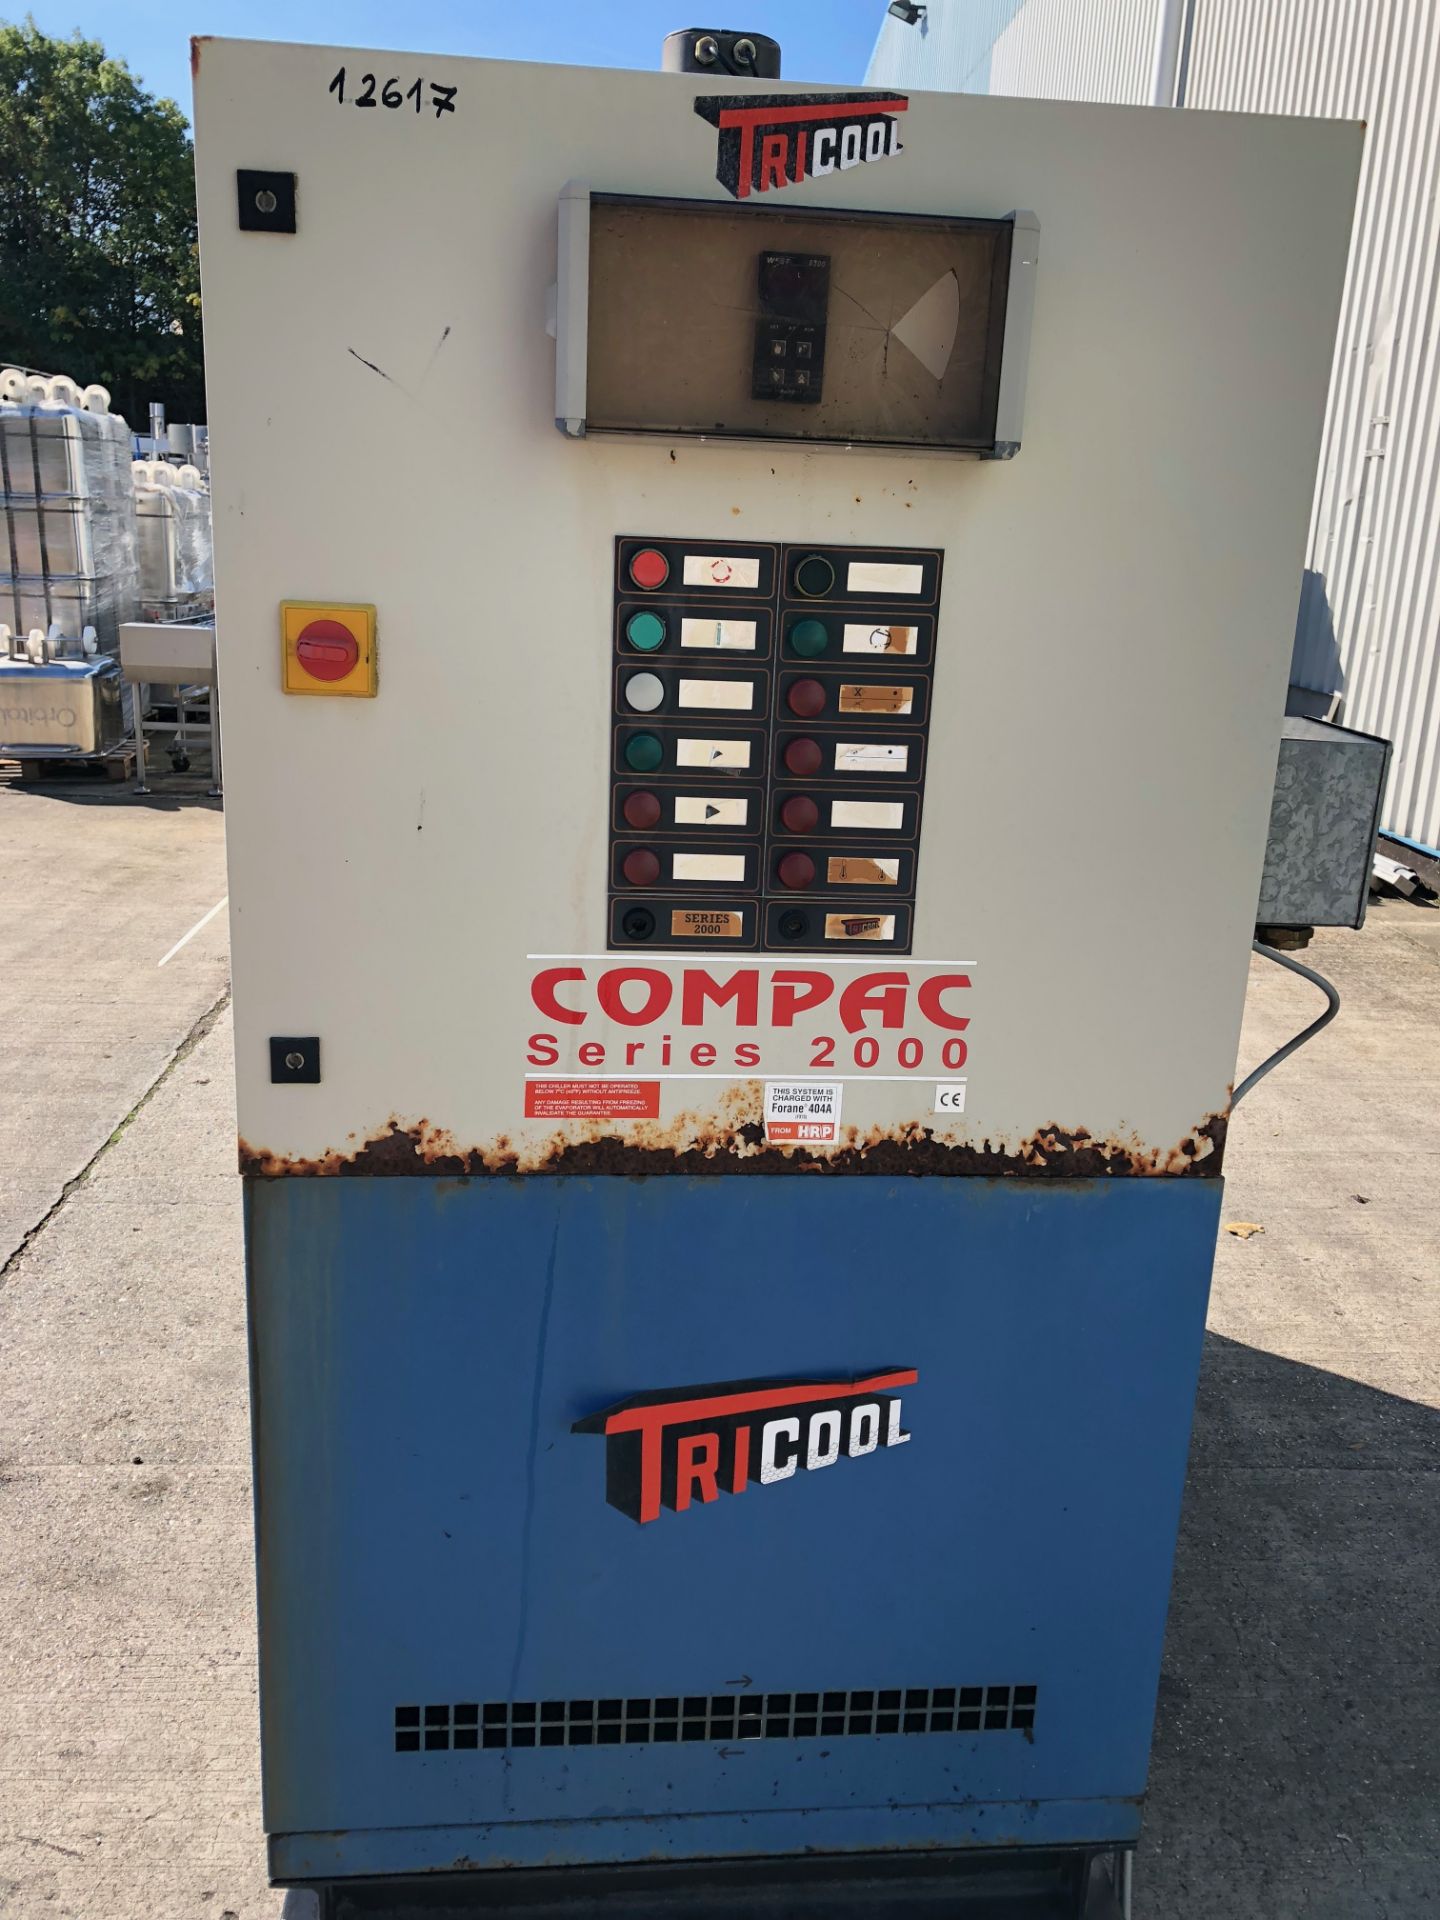 Tricool Compac Series 2000 Water Cooler - Image 2 of 7